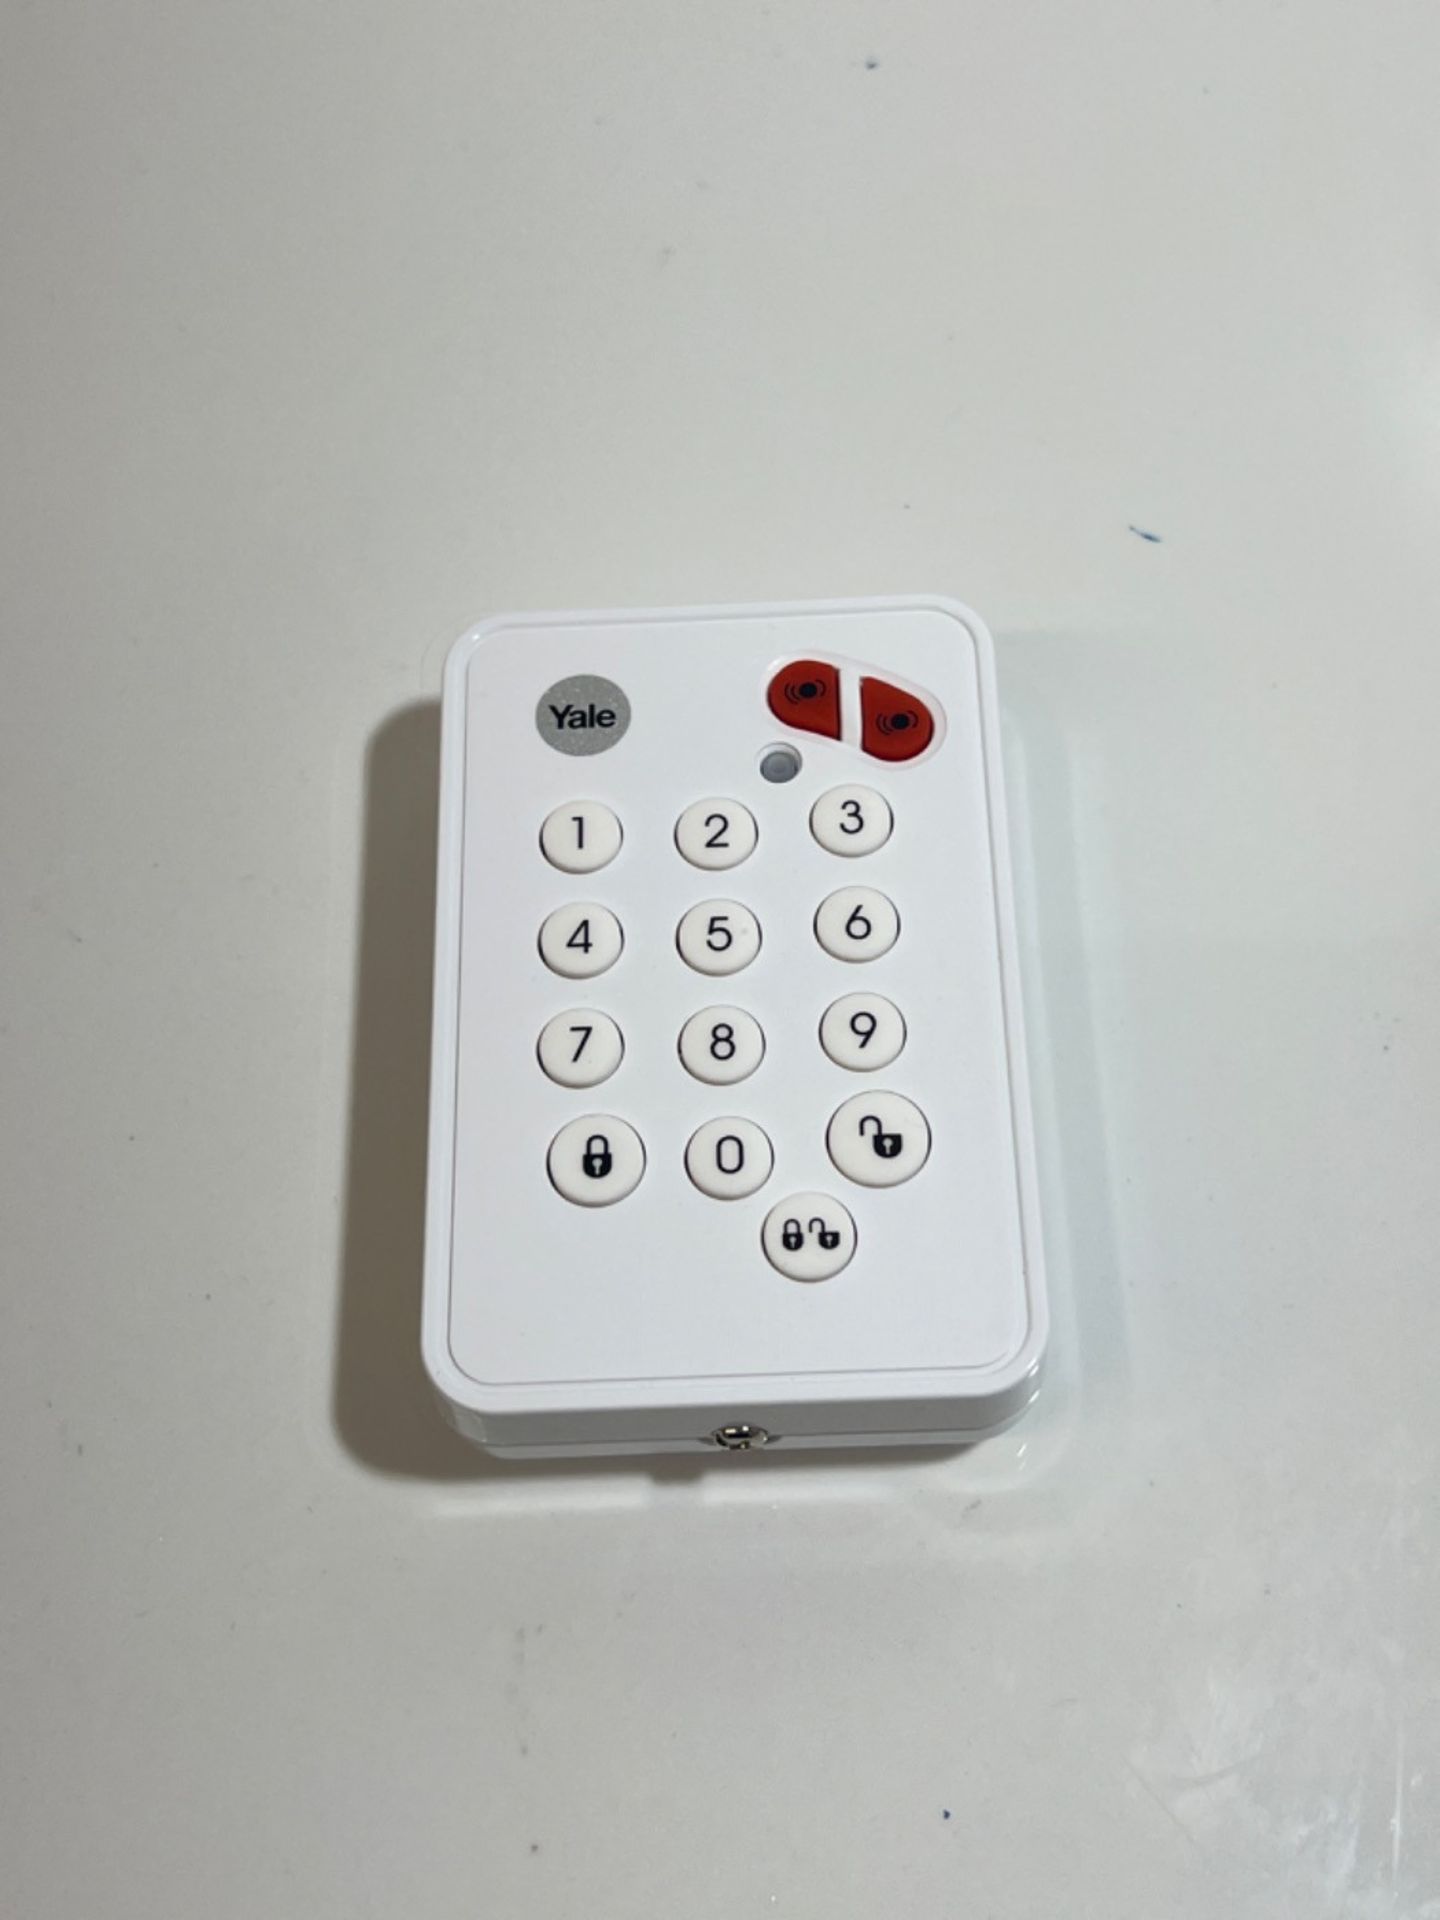 Yale EF-KP Easy Fit Alarm Remote Keypad, White, Accessory for SR & EF Alarms - Image 2 of 3